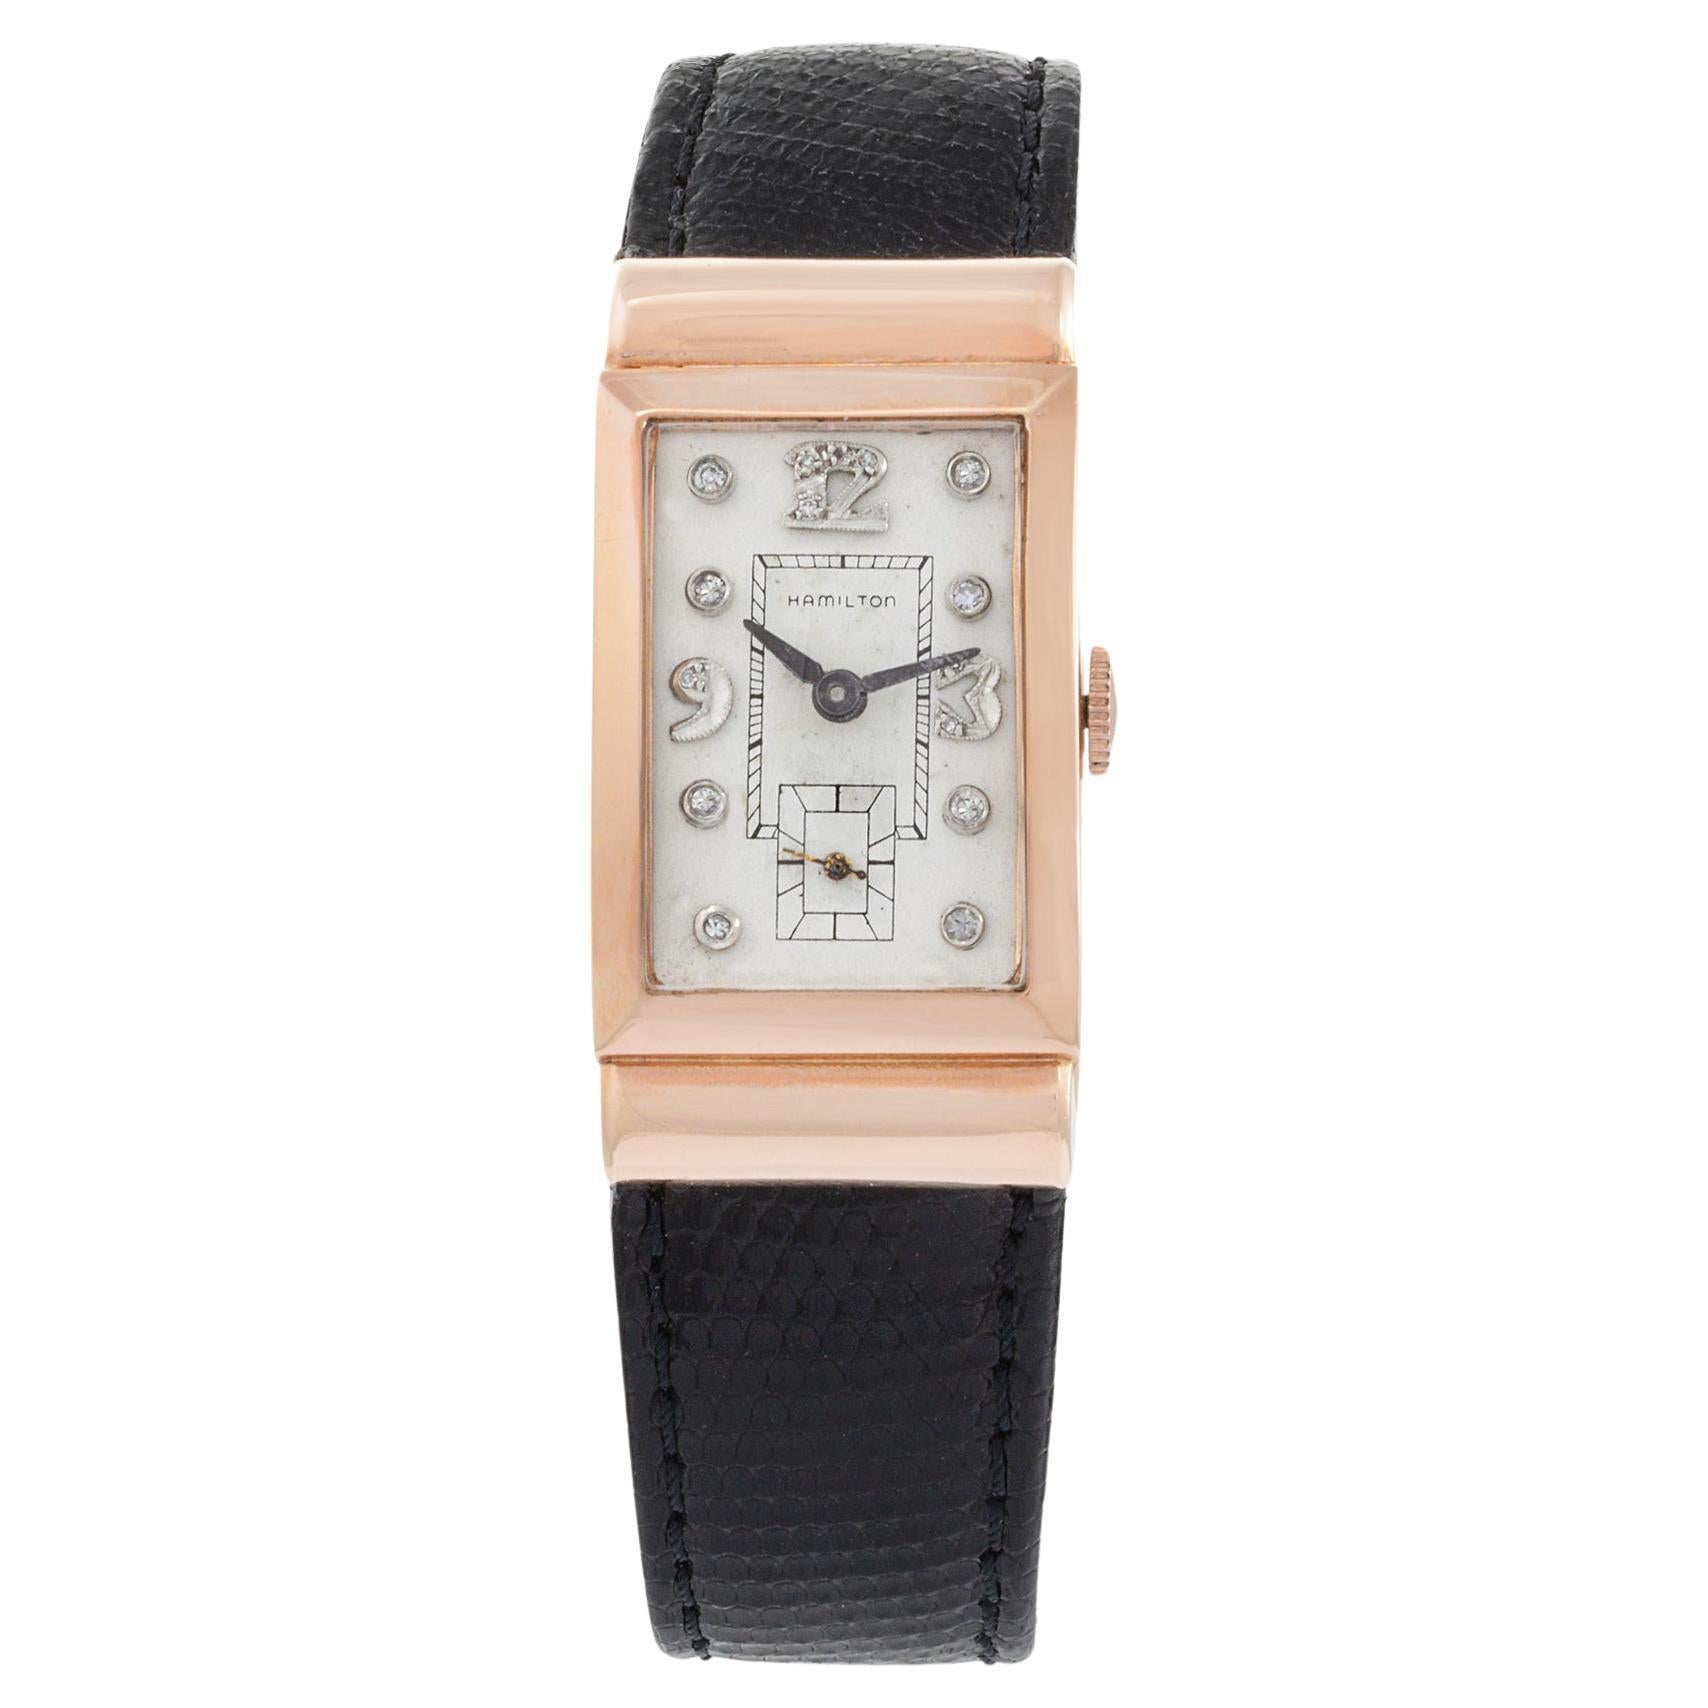 Hamilton Hooded Lug Tank Watch 14K Rose Gold and Diamonds For Sale